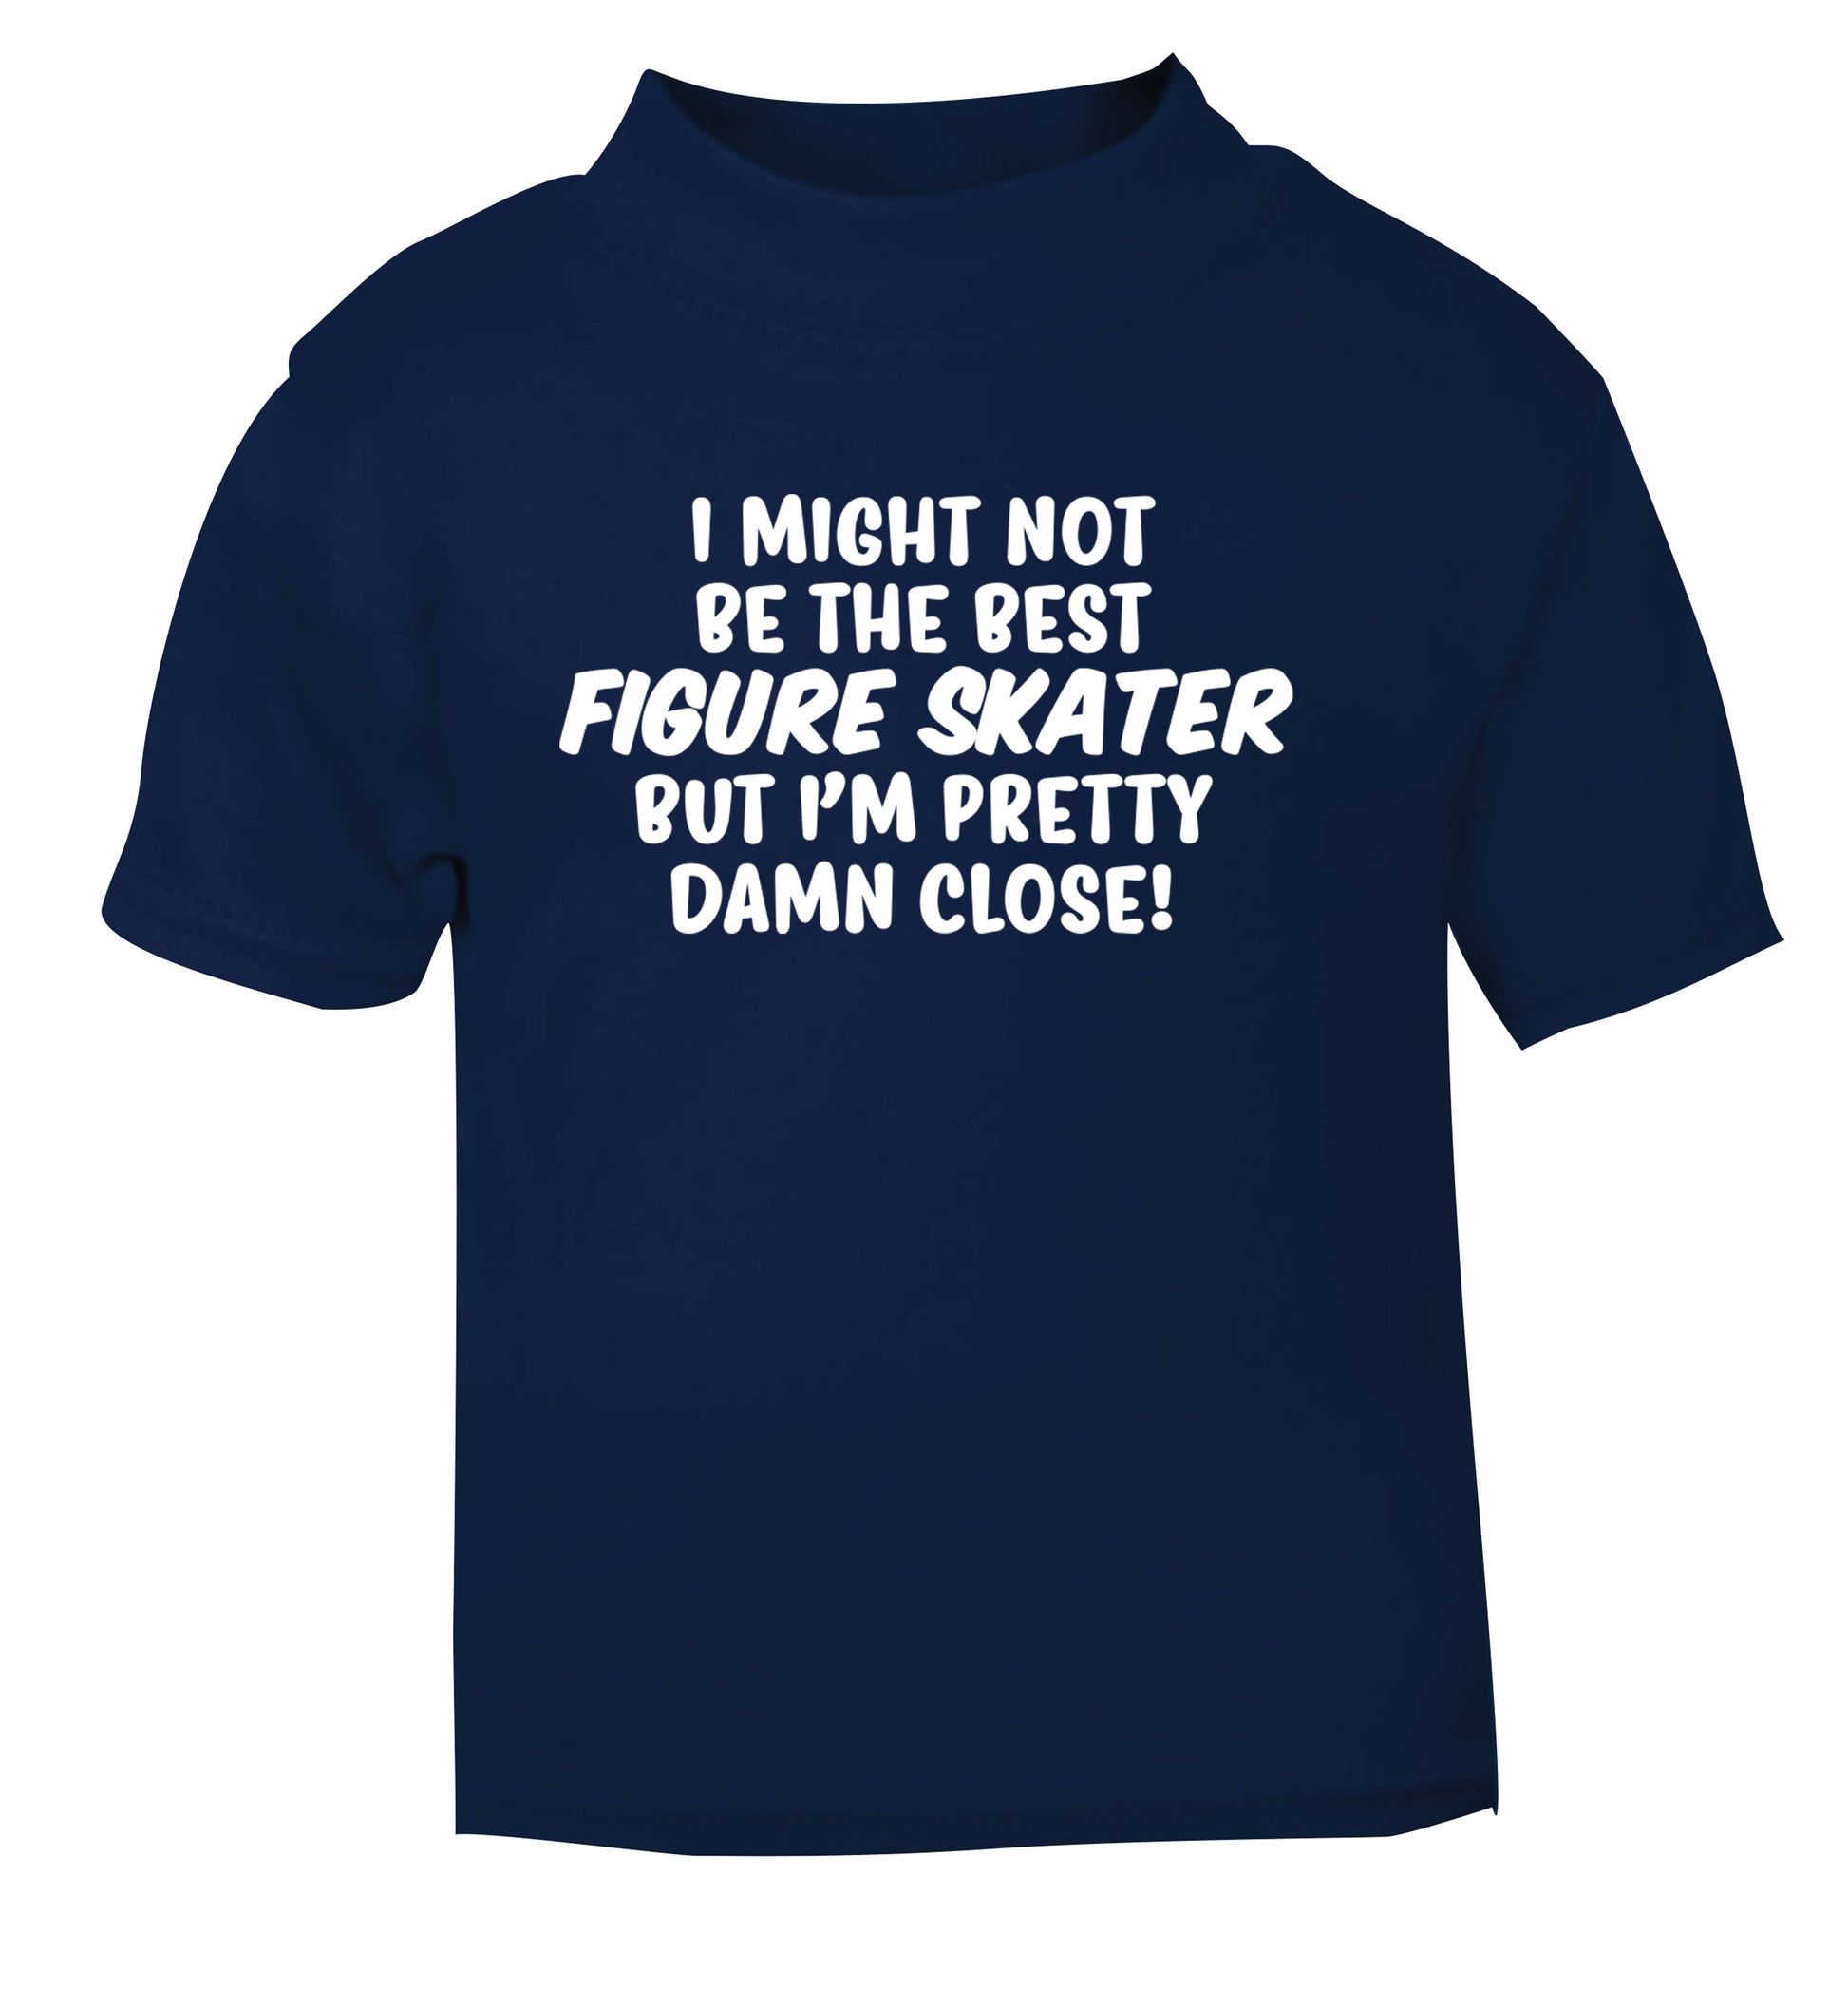 I might not be the best figure skater but I'm pretty damn close! navy Baby Toddler Tshirt 2 Years